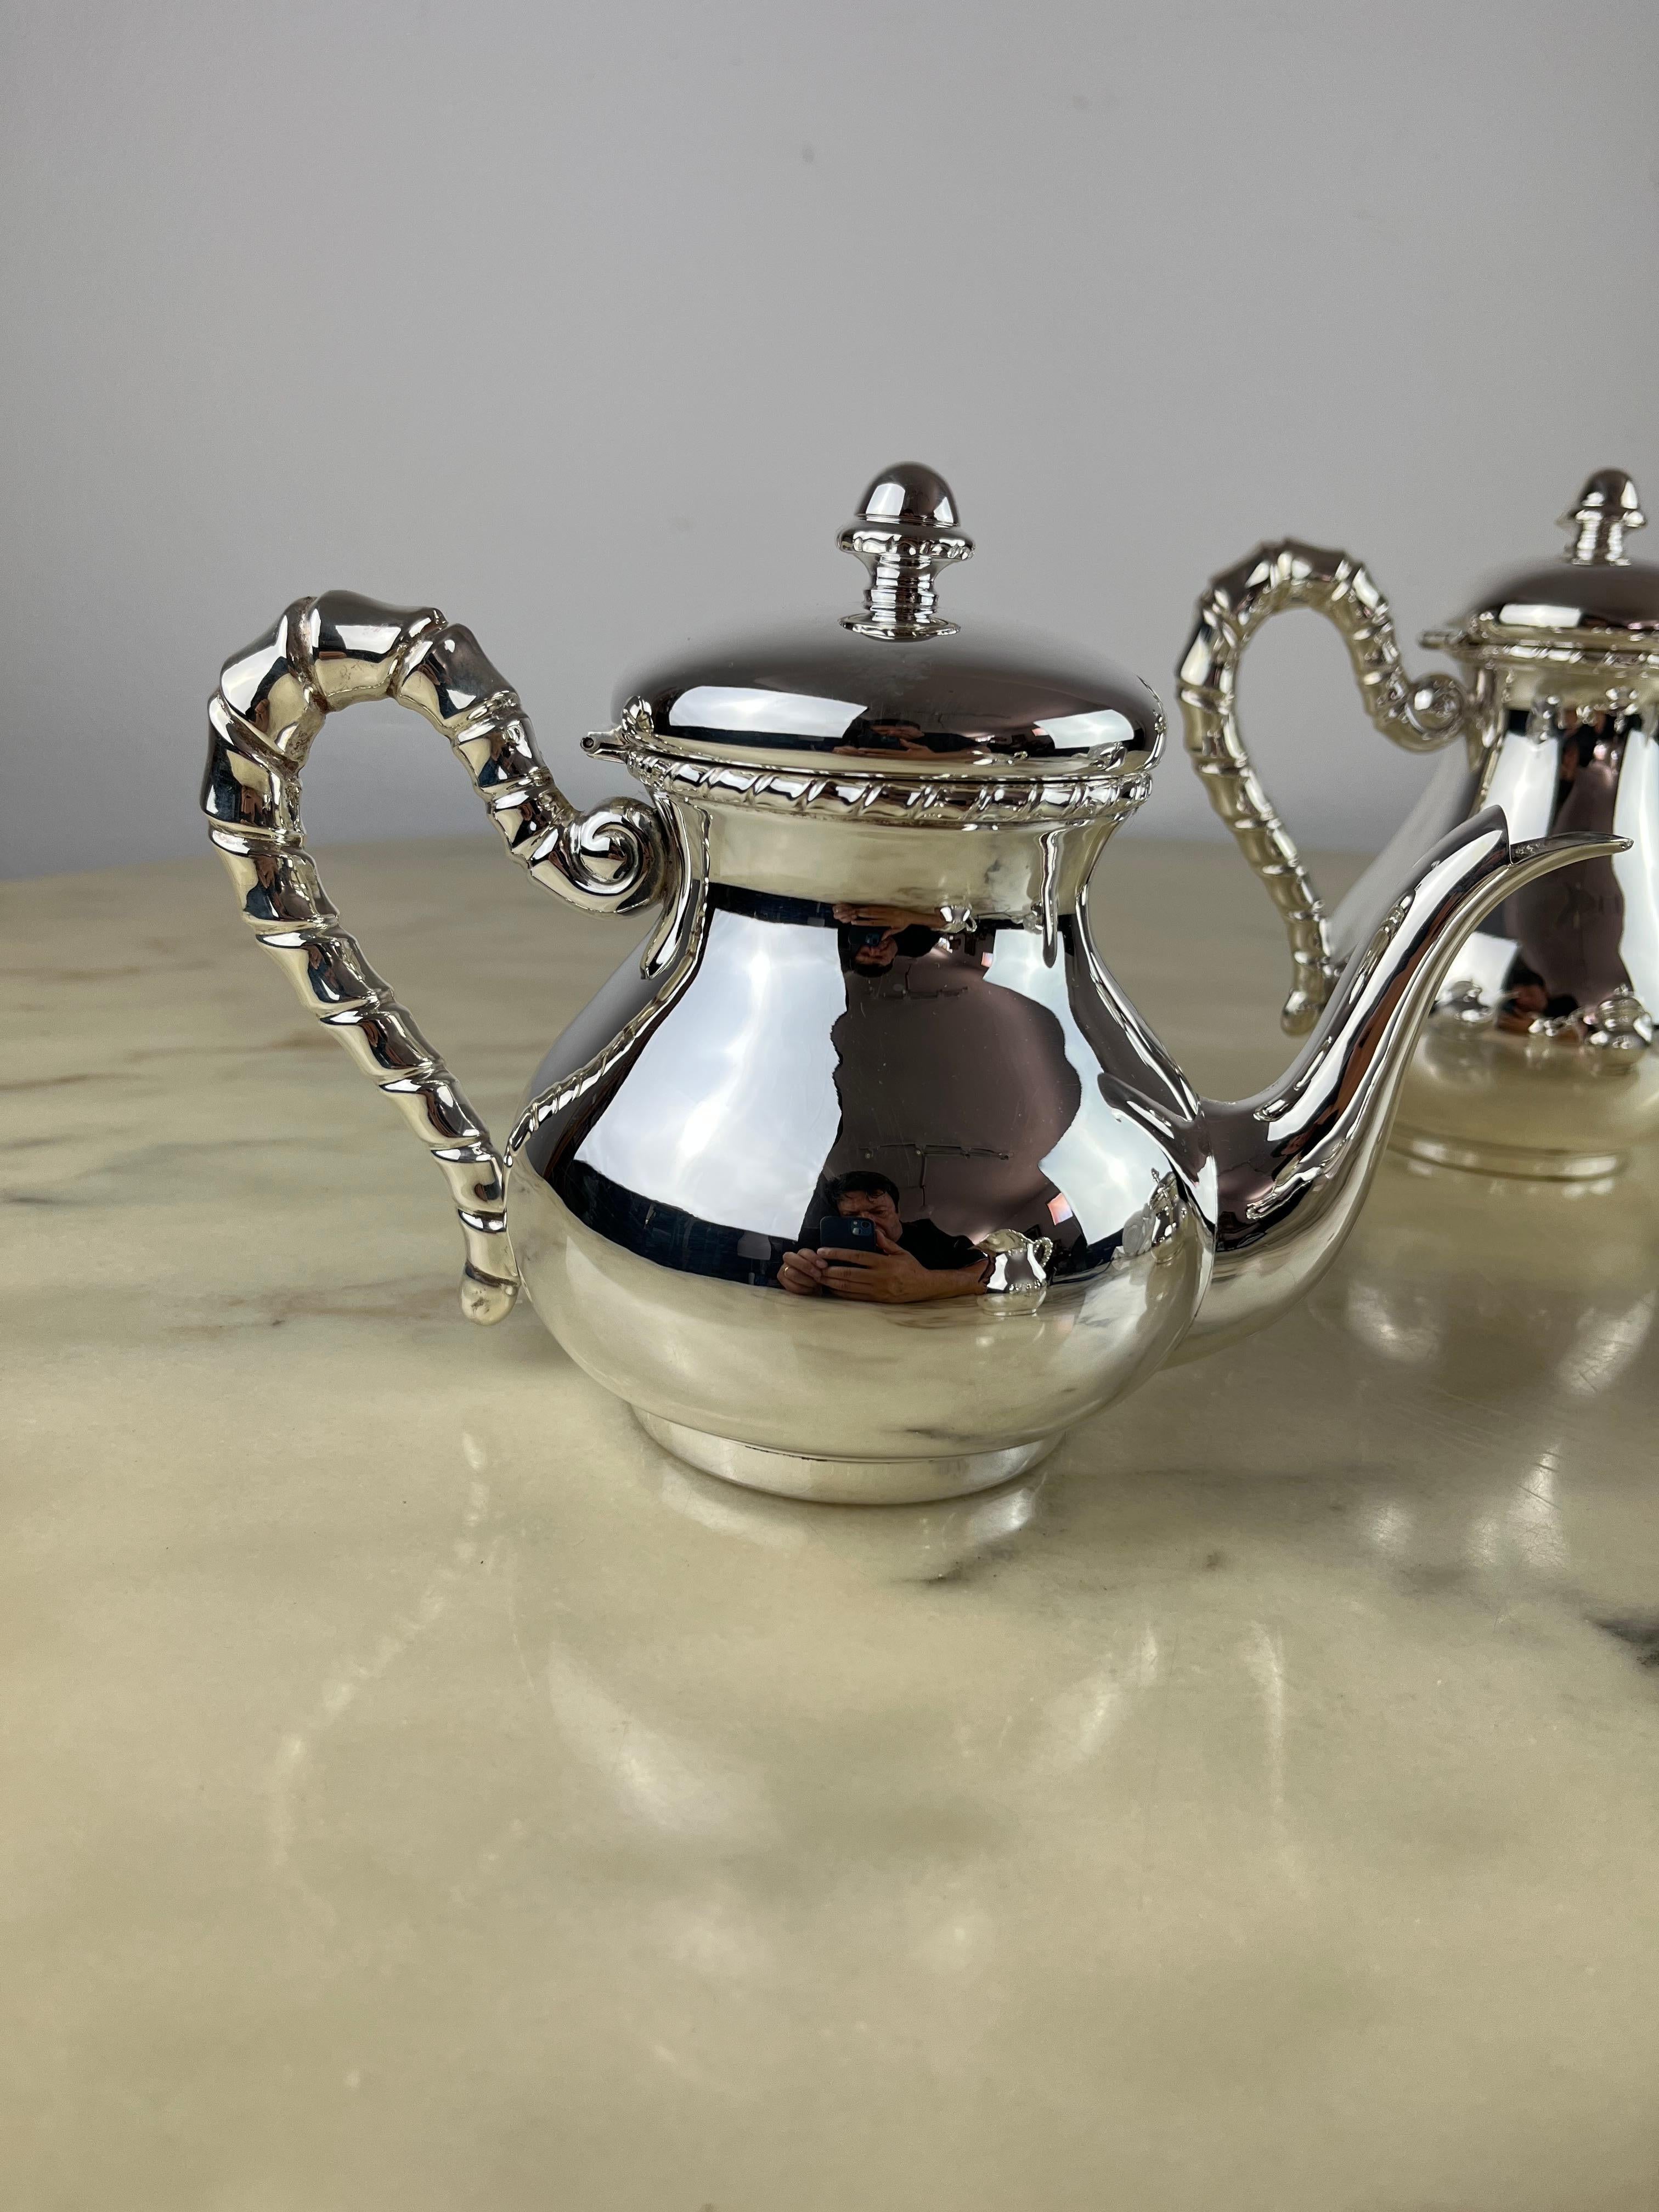 800 silver tea and coffee set 4 pieces
Made in Italy, 80s. Never used. Like New.
Total weight kg. 1.00.
The teapot is 18 cm high, the coffee pot 15 cm.
All the pieces are regularly stamped with State marks.
Teapot cm 18 x cm 16 x cm 9;
Coffee pot 15